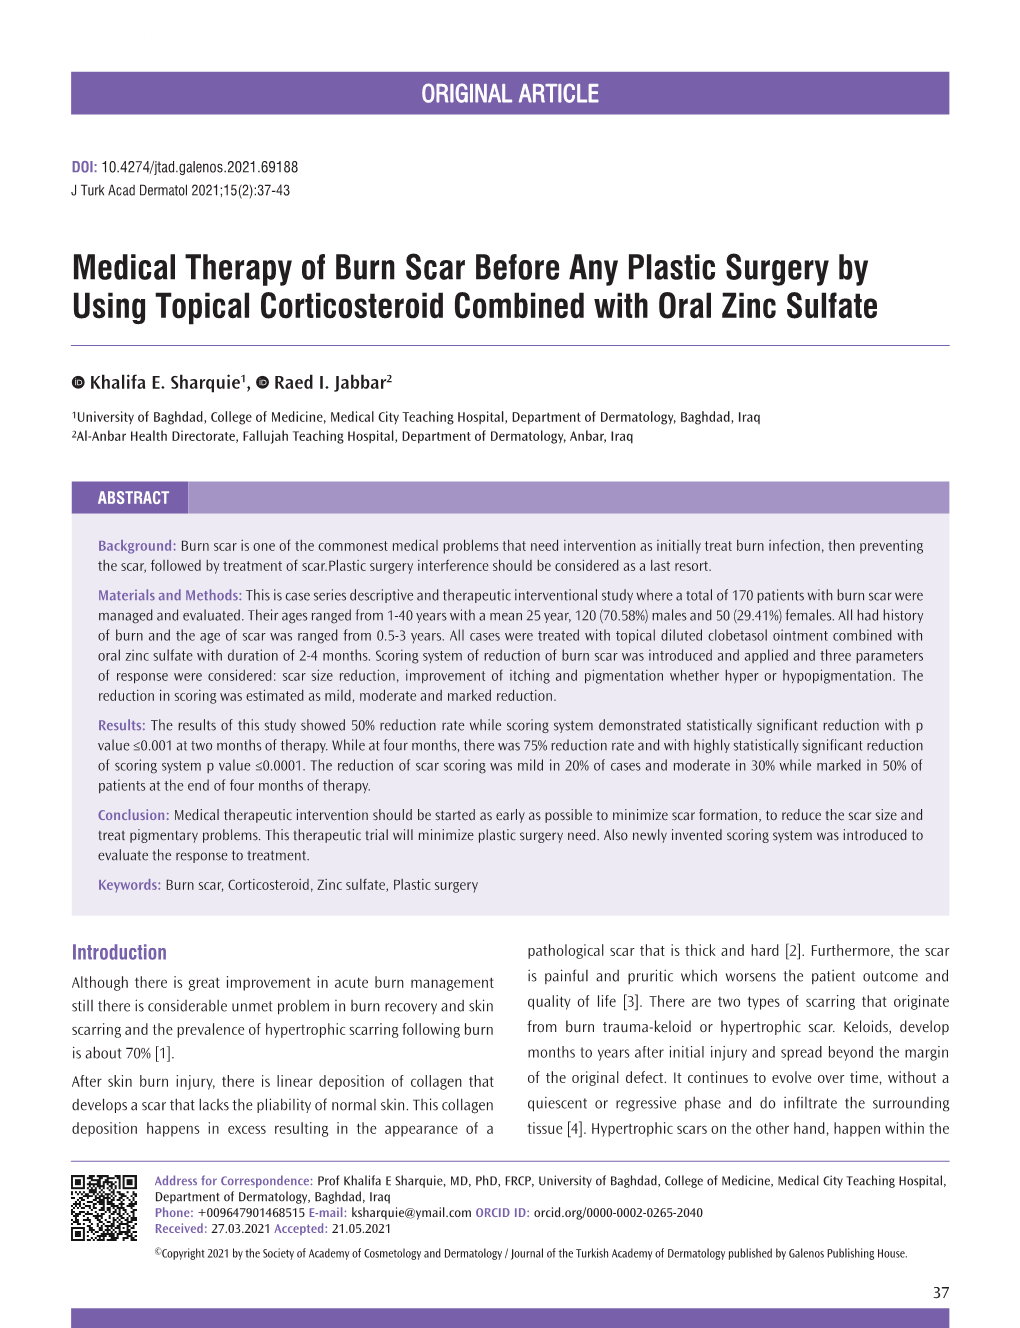 Medical Therapy of Burn Scar Before Any Plastic Surgery by Using Topical Corticosteroid Combined with Oral Zinc Sulfate